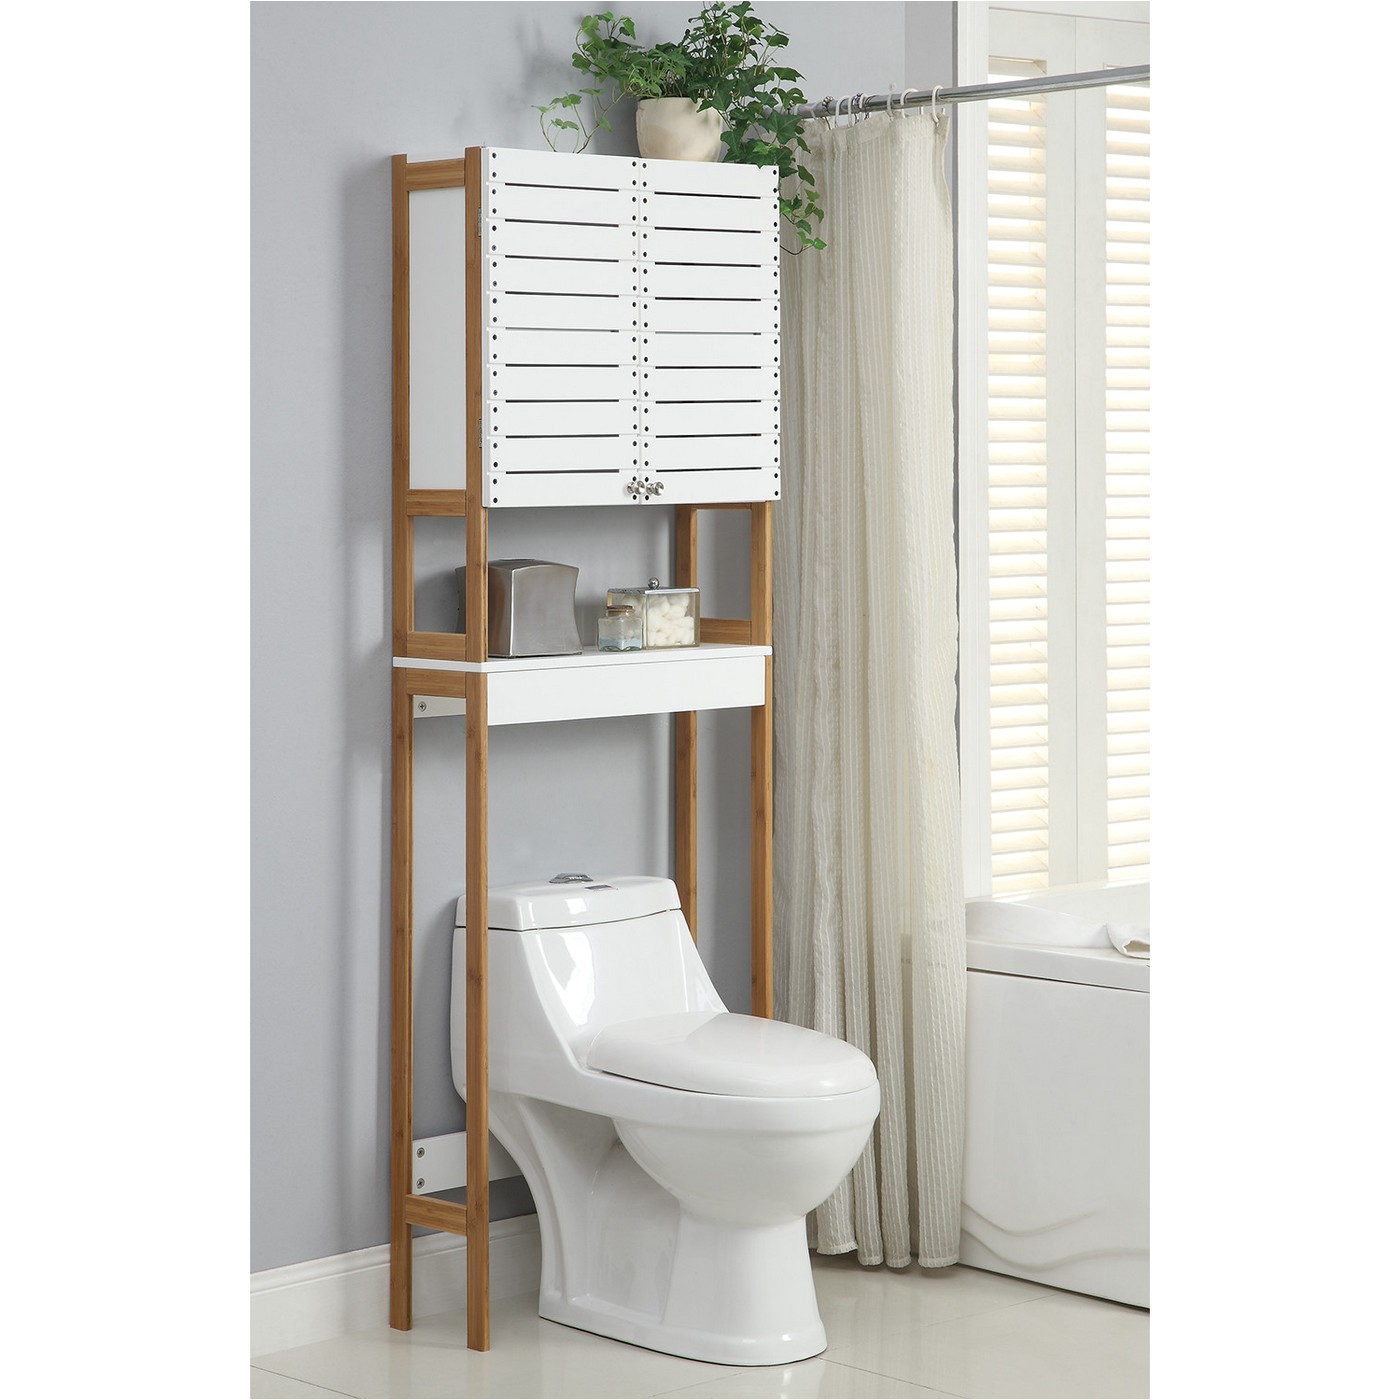 Free Standing Over the toilet Cabinet Manly Freestanding Over toilet Storage as Wells as Glass Doors Along